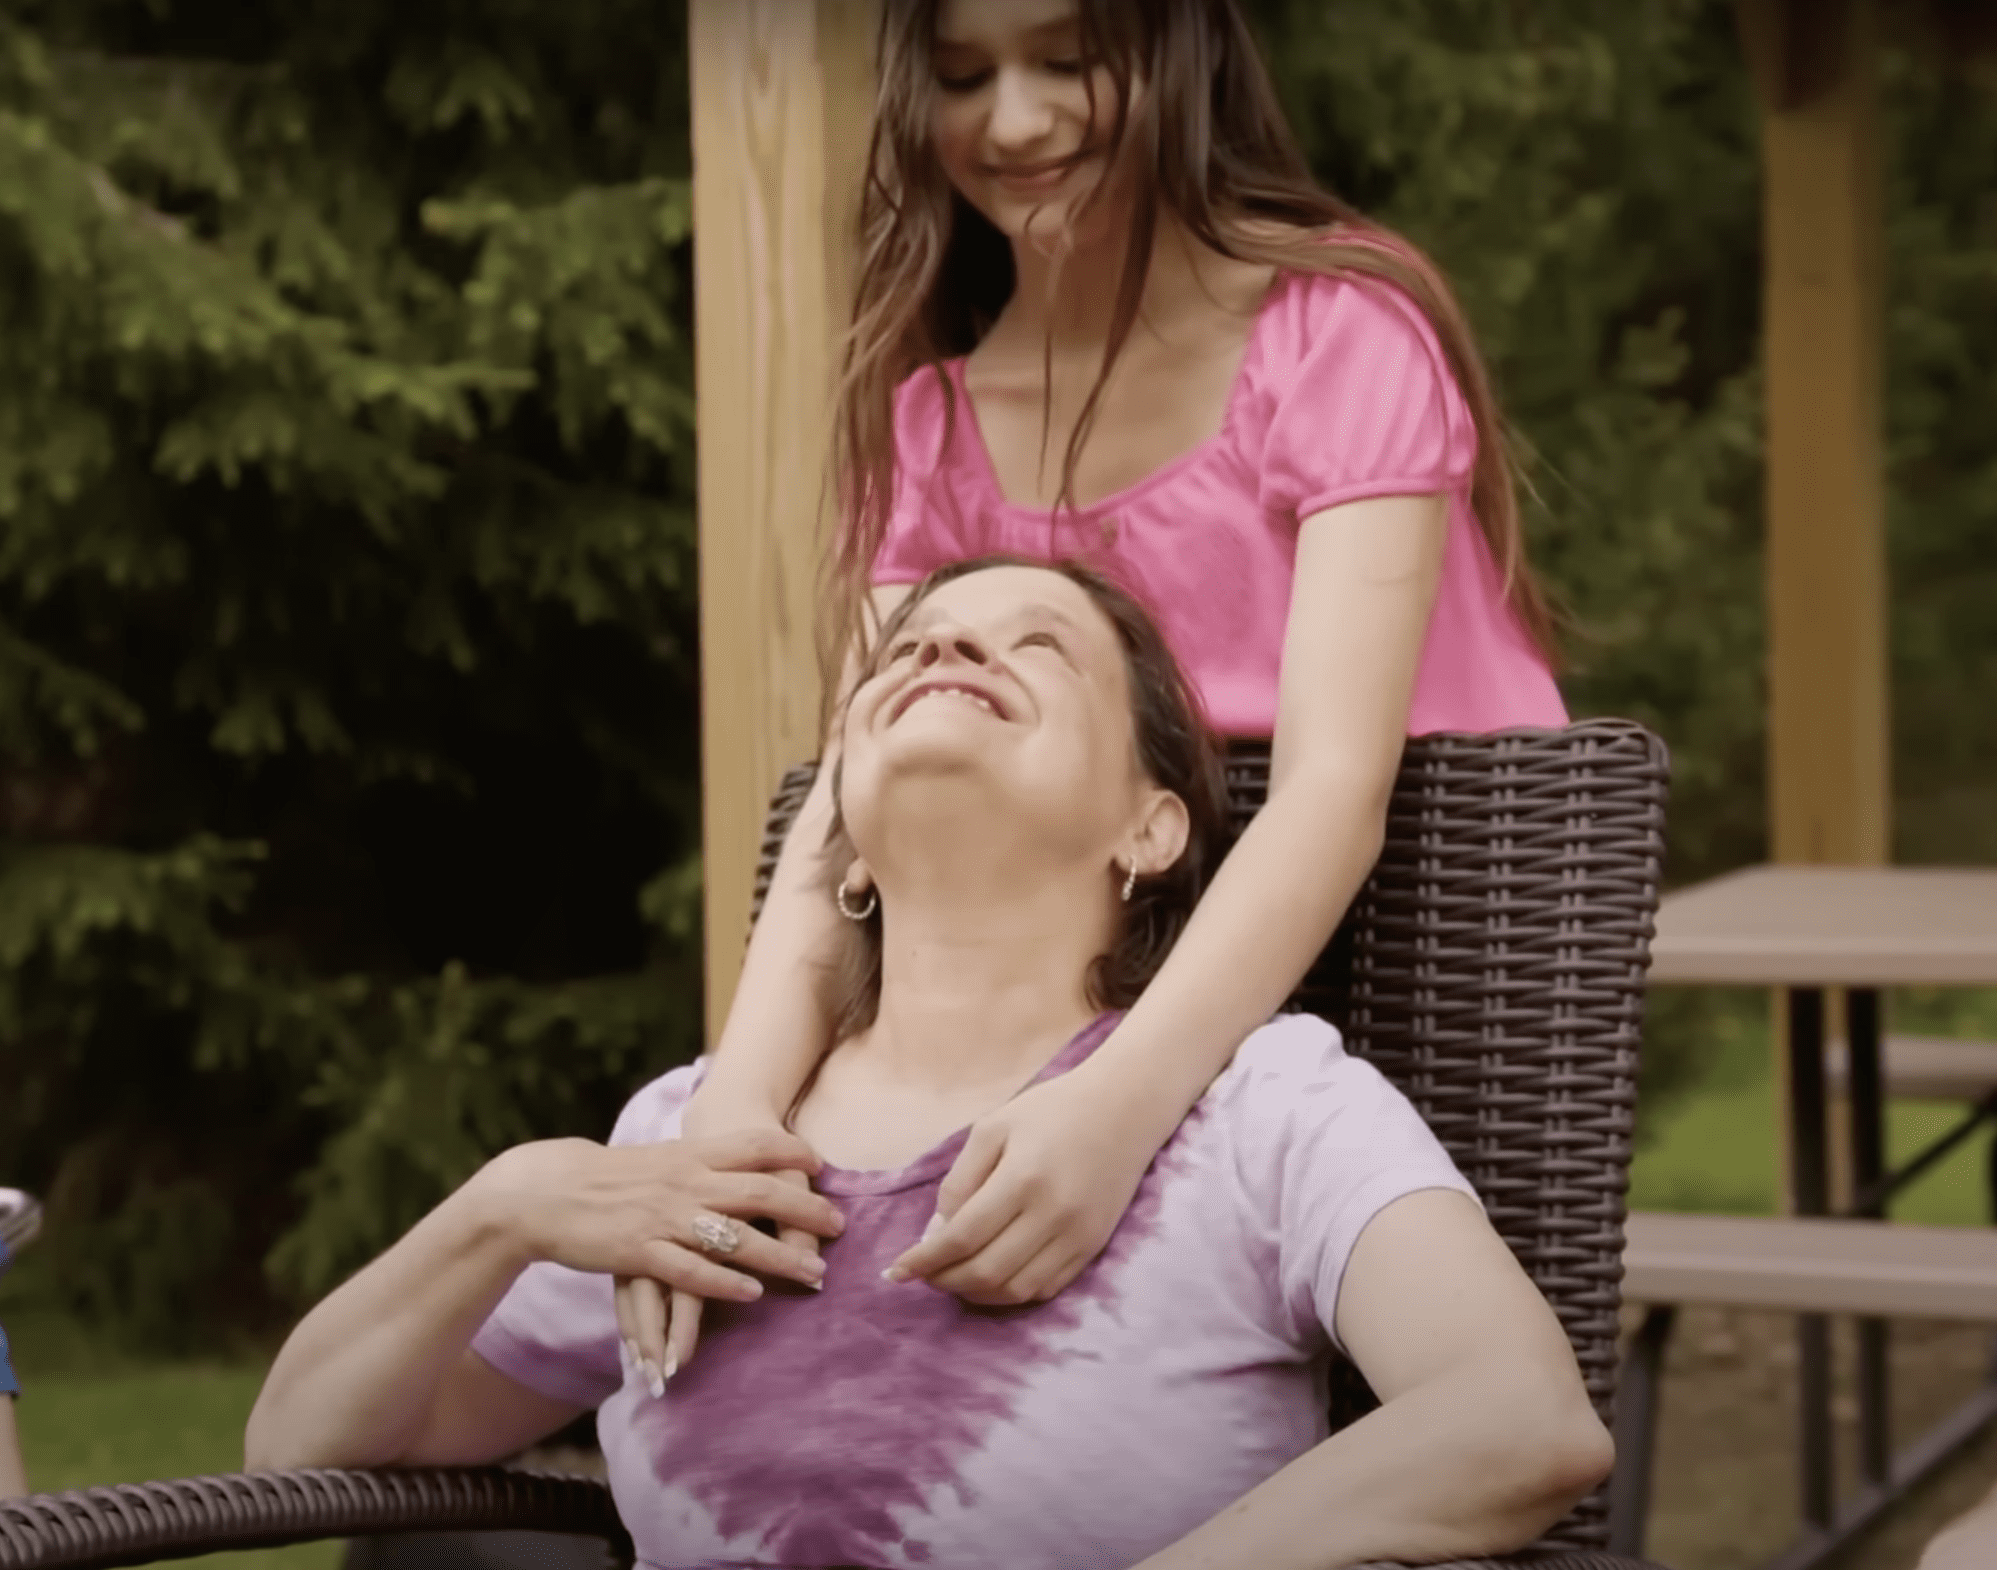 Annie and her mom, Cathy, holding each other | Source: Youtube/CBN News